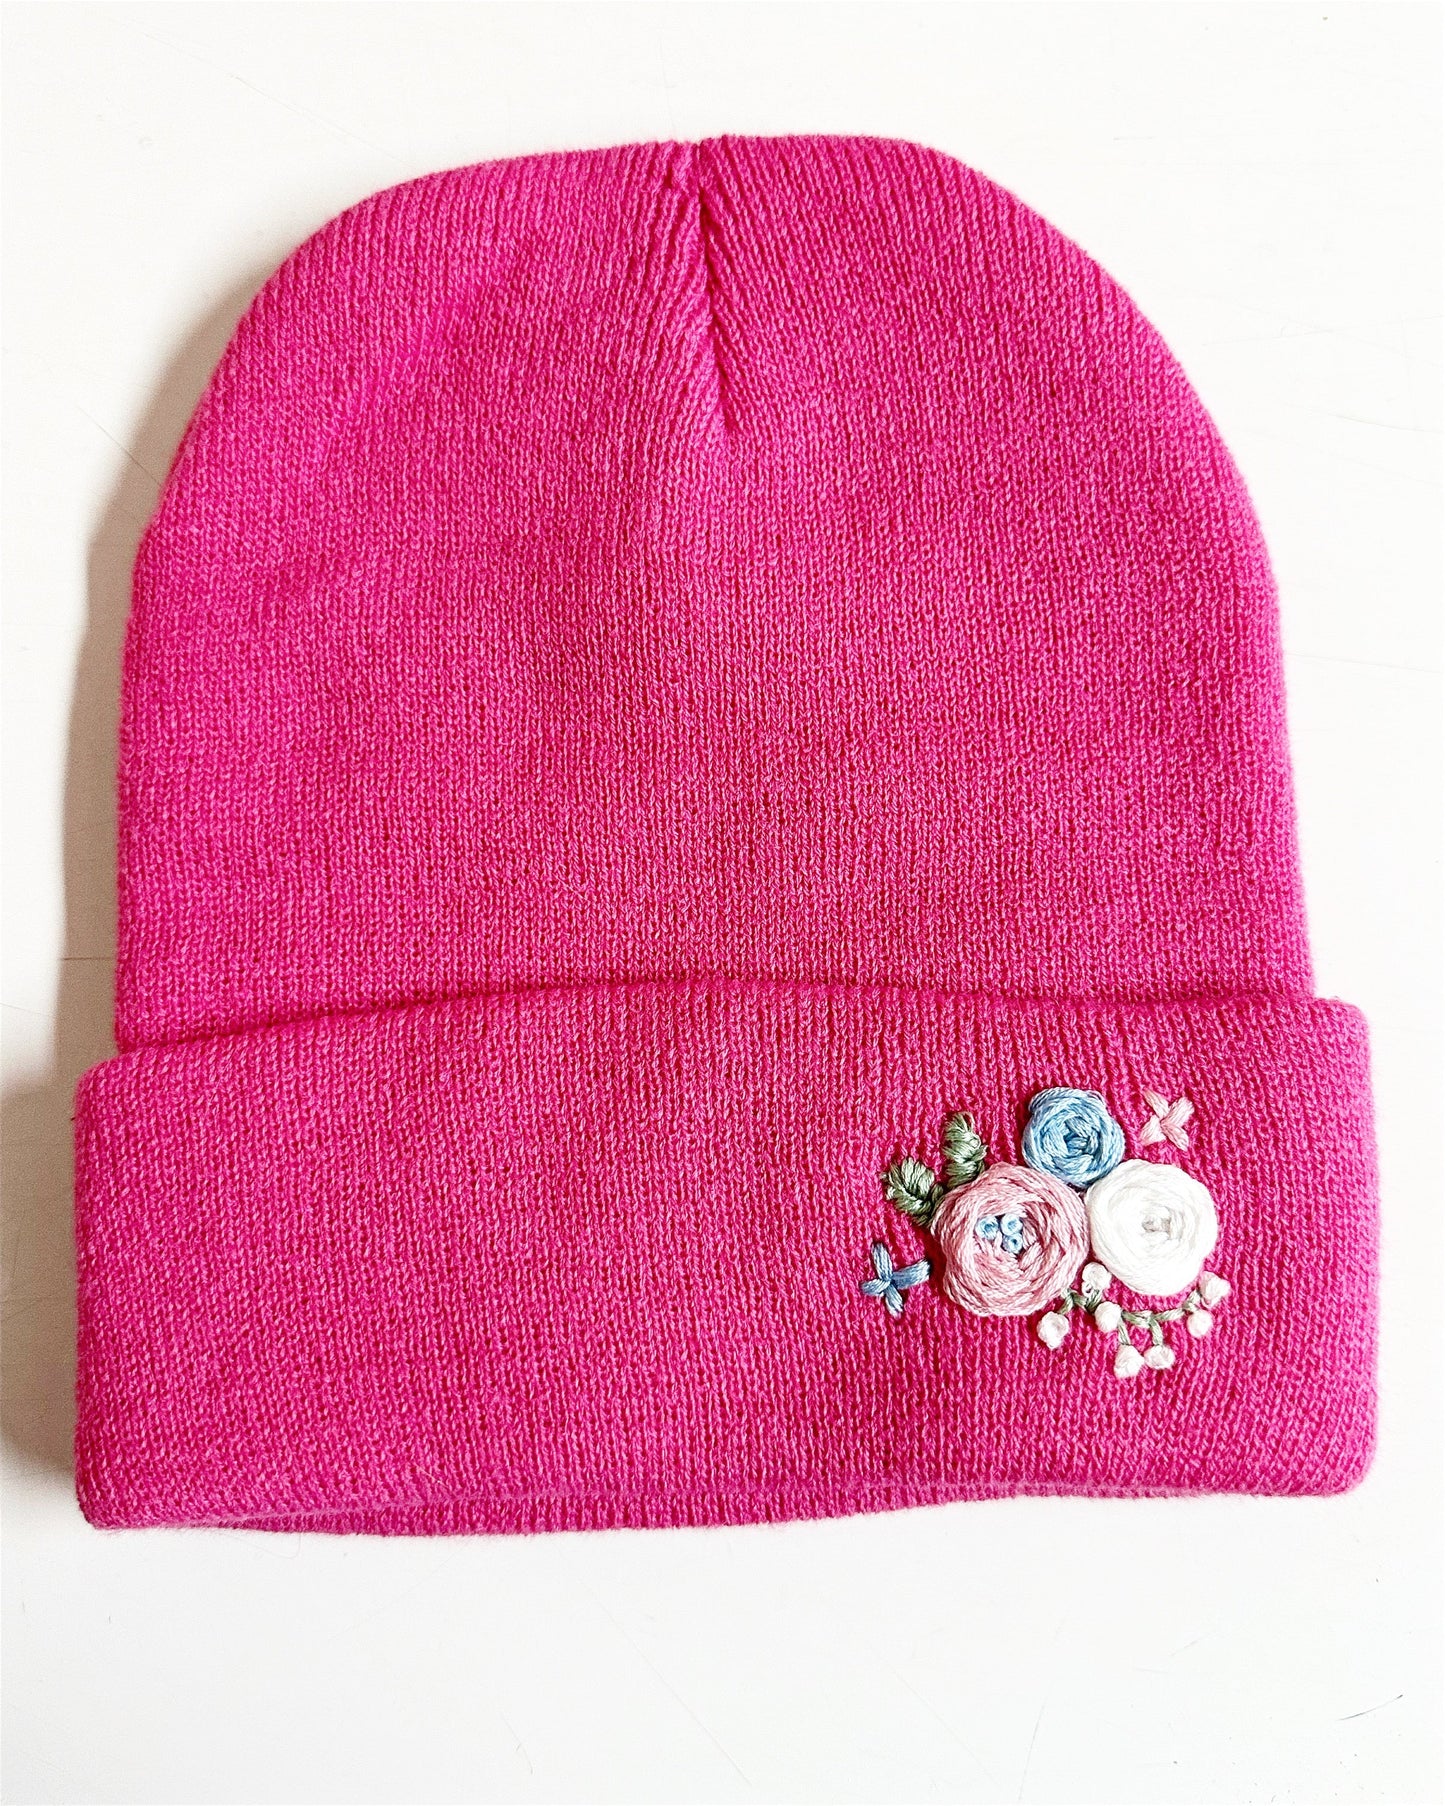 Hand Embroidered Floral Beanie: Black